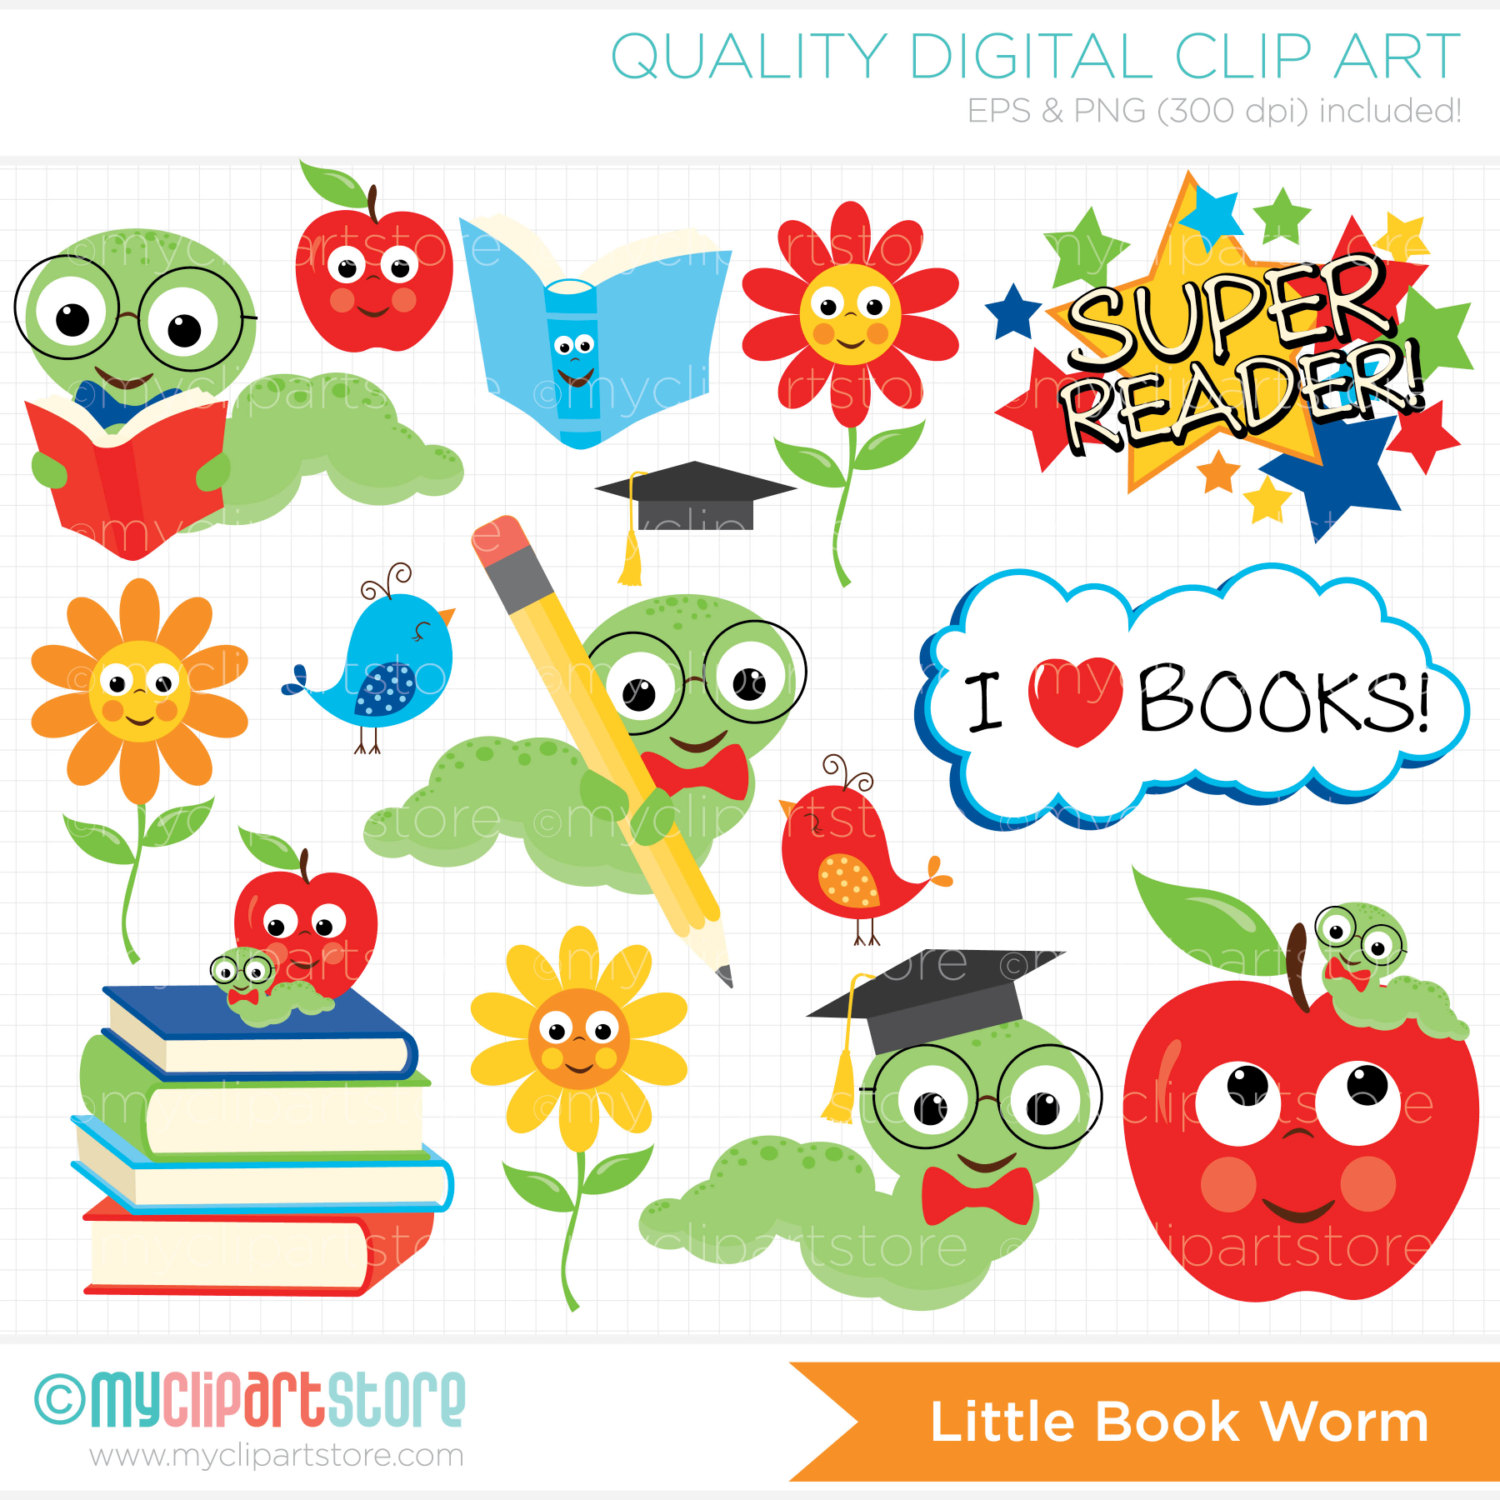 Back to book worm. Bookworm clipart school